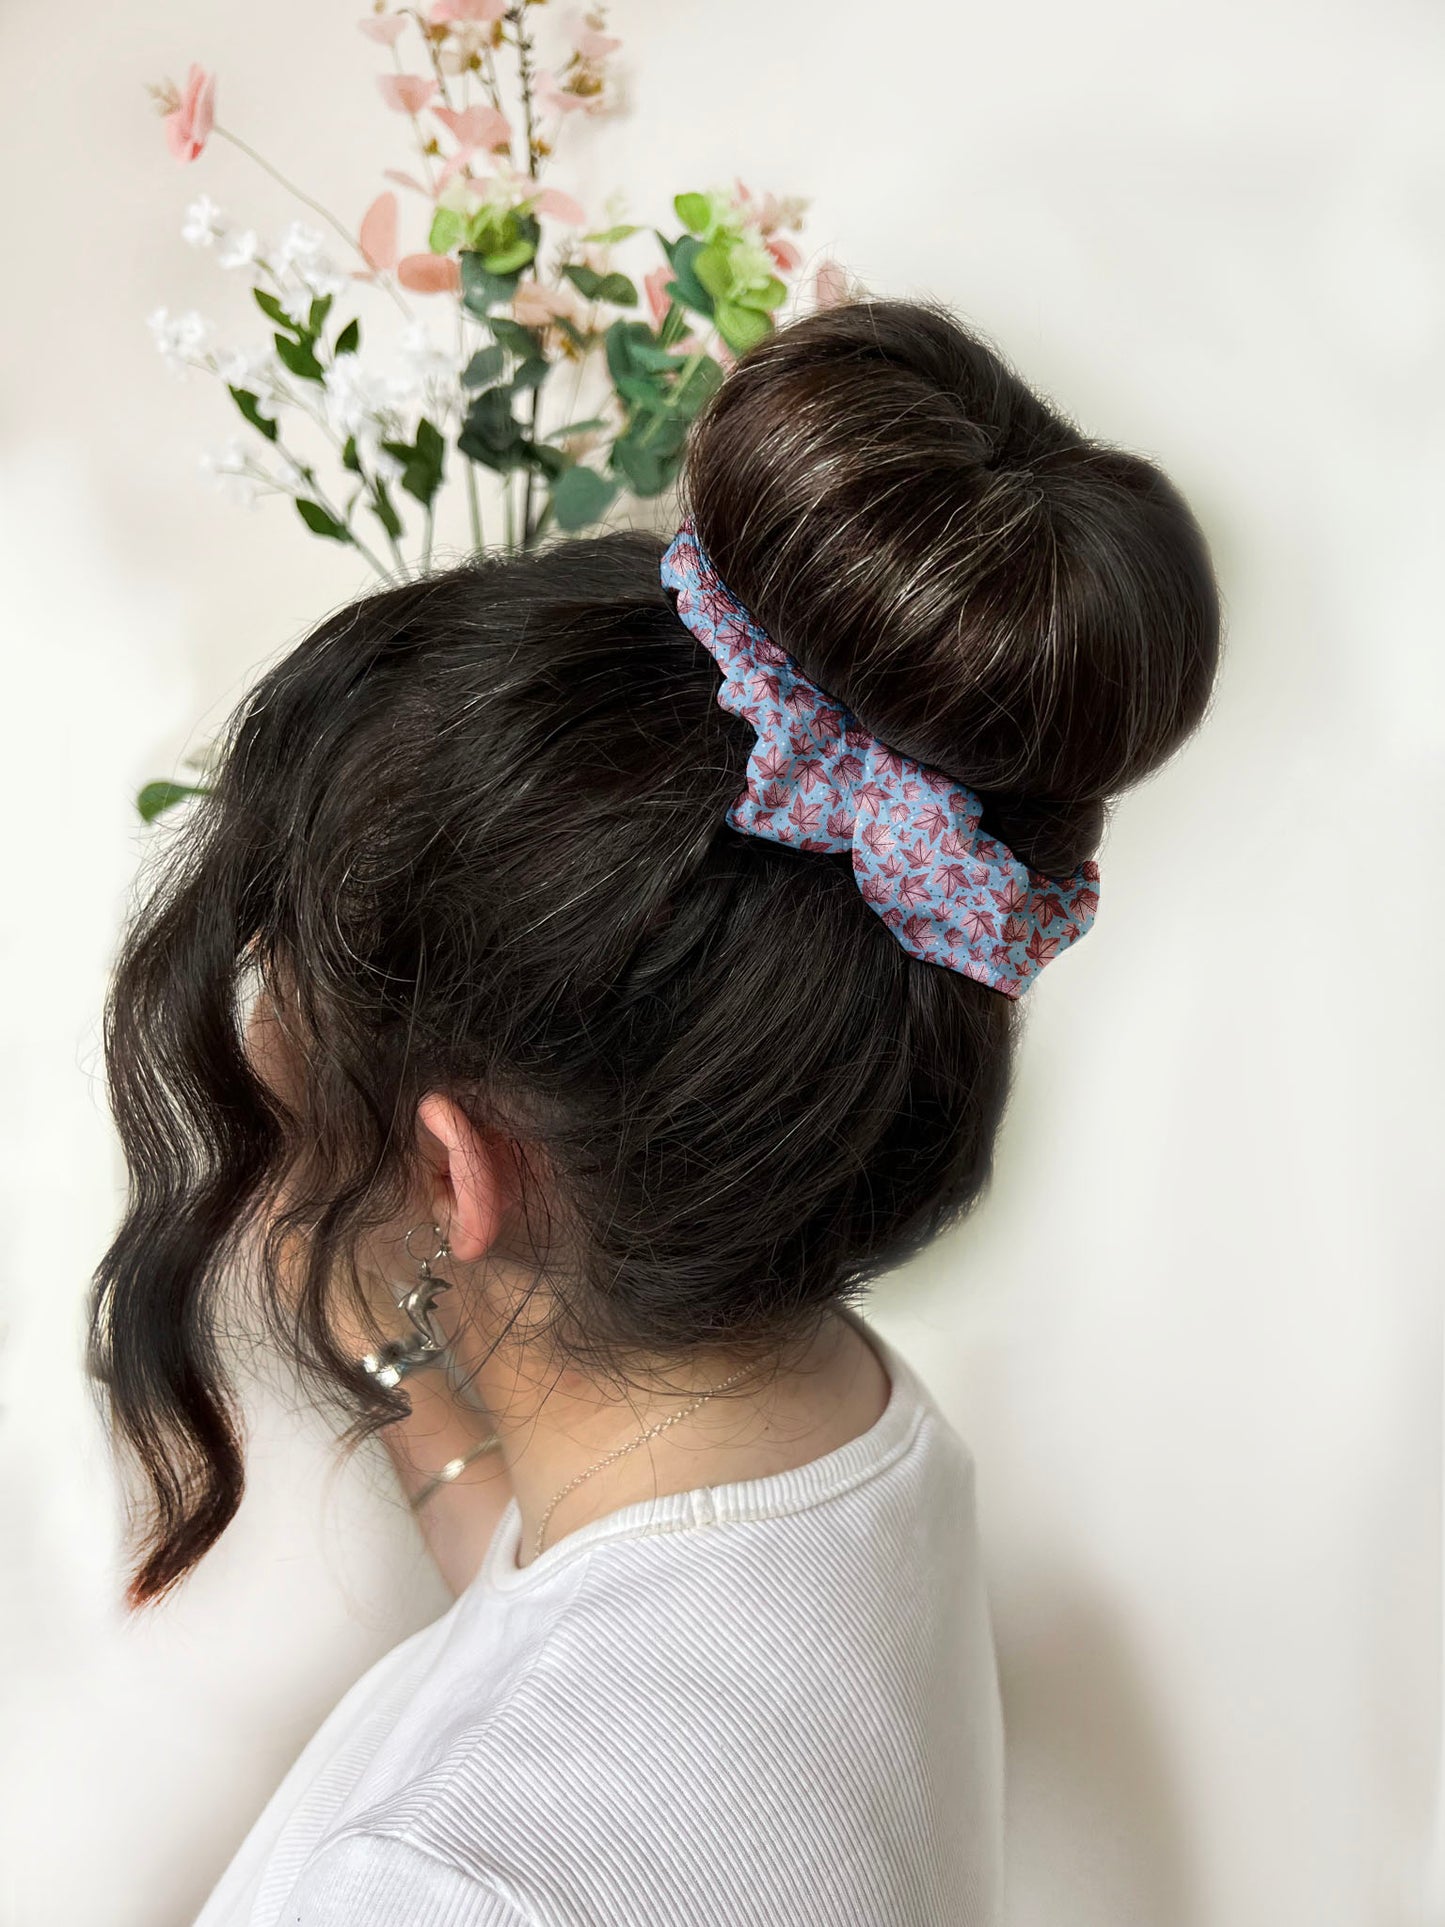 dark haired girl wears pink leafy patterned scrunchie in hair around a bun. with plants in the background in a white room